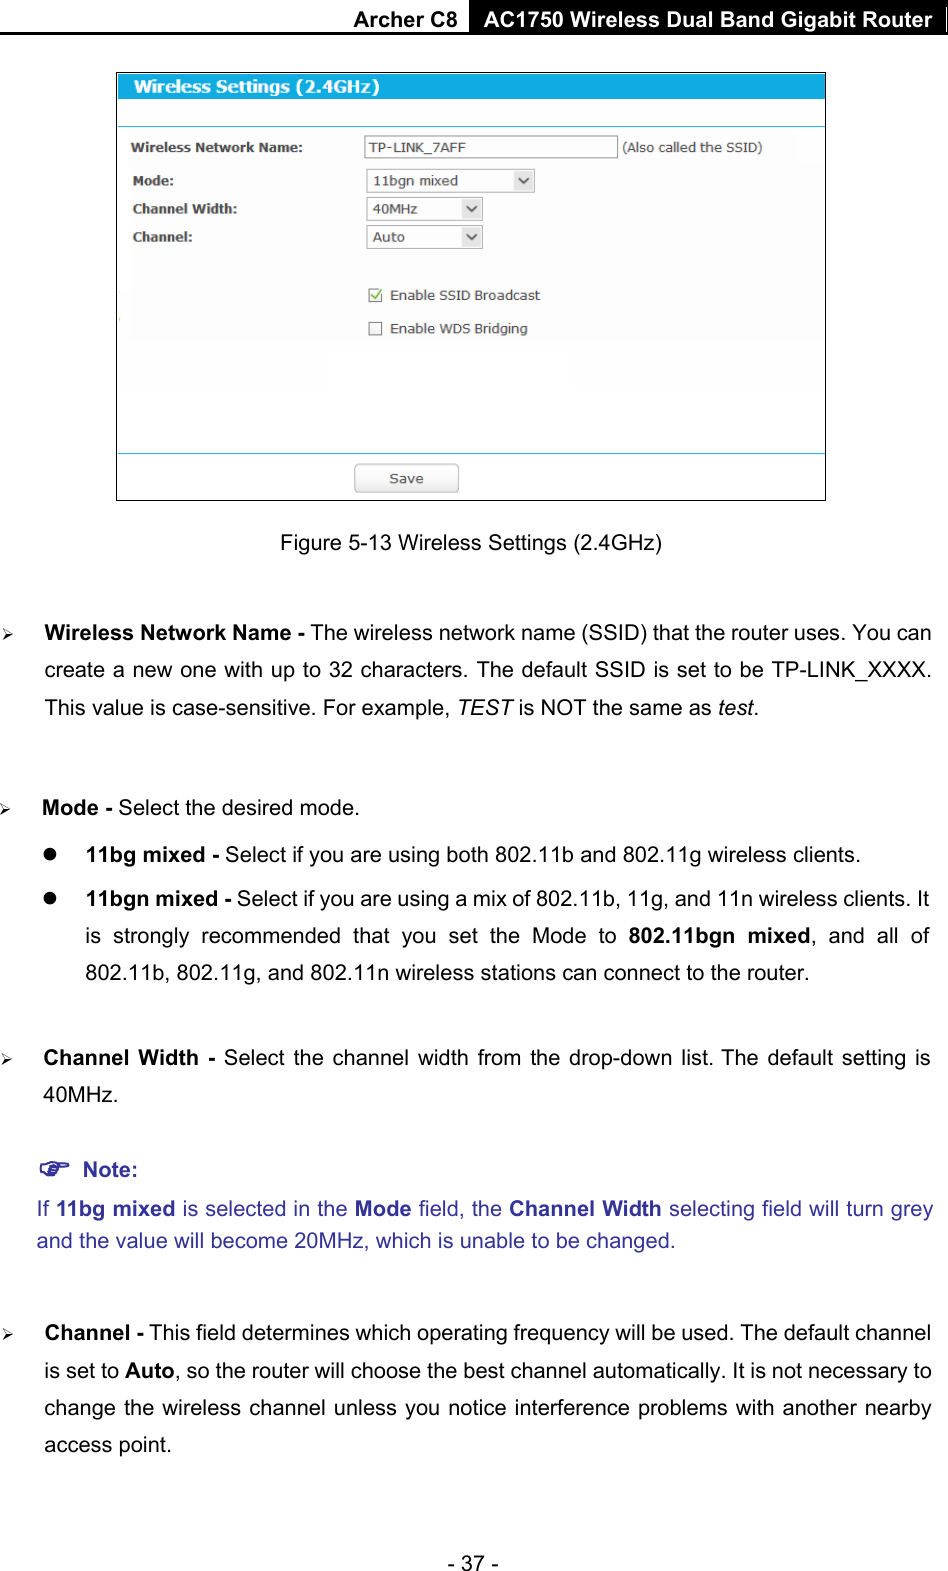 Archer C8 AC1750 Wireless Dual Band Gigabit Router  - 37 -  Figure 5-13 Wireless Settings (2.4GHz)  Wireless Network Name - The wireless network name (SSID) that the router uses. You can create a new one with up to 32 characters. The default SSID is set to be TP-LINK_XXXX. This value is case-sensitive. For example, TEST is NOT the same as test.    Mode - Select the desired mode.    11bg mixed - Select if you are using both 802.11b and 802.11g wireless clients.  11bgn mixed - Select if you are using a mix of 802.11b, 11g, and 11n wireless clients. It is strongly recommended that you set the Mode to 802.11bgn mixed, and all of 802.11b, 802.11g, and 802.11n wireless stations can connect to the router.  Channel  Width  -  Select the channel width from the drop-down list. The default setting is 40MHz.  Note:   If 11bg mixed is selected in the Mode field, the Channel Width selecting field will turn grey and the value will become 20MHz, which is unable to be changed.    Channel - This field determines which operating frequency will be used. The default channel is set to Auto, so the router will choose the best channel automatically. It is not necessary to change the wireless channel unless you notice interference problems with another nearby access point. 